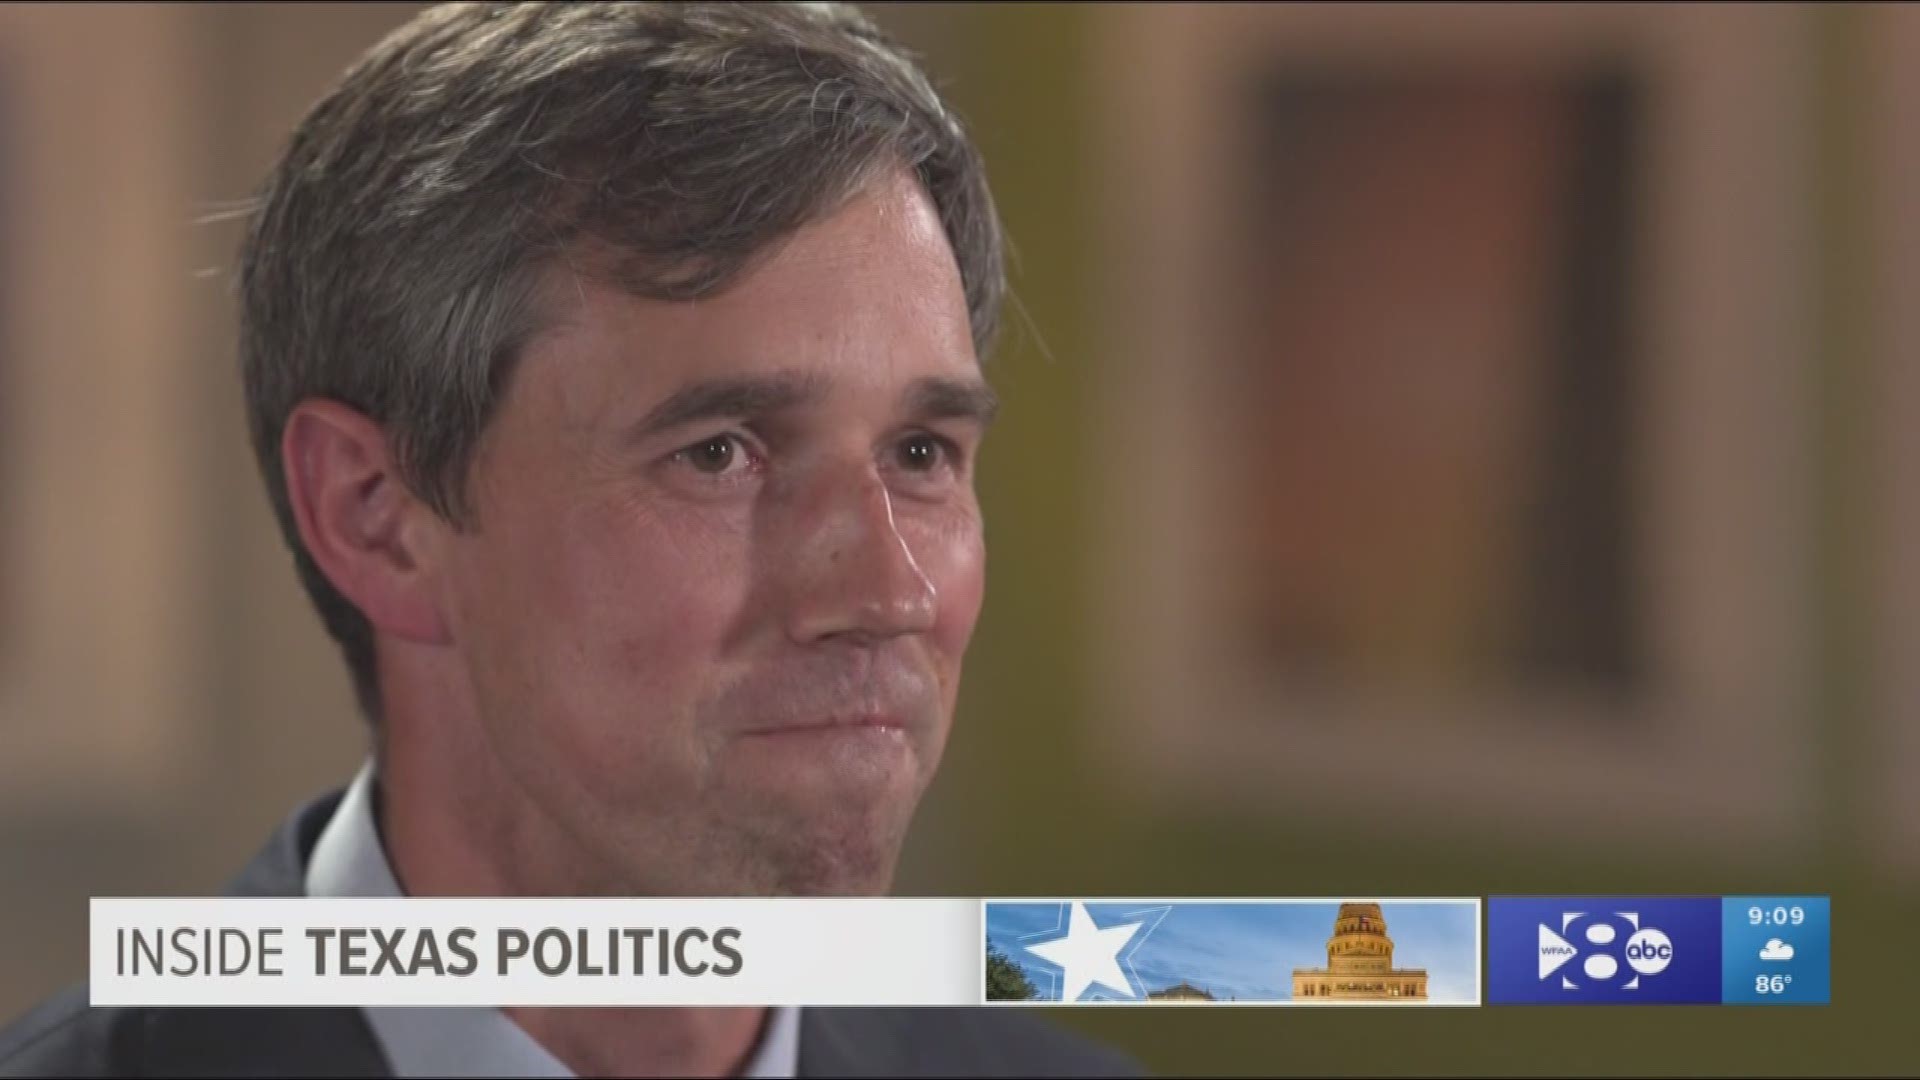 Inside Texas Politics began with U.S. Rep. Beto O'Rourke, Democratic candidate for U.S. Senate, in studio to discuss how much it will cost to unseat incumbent Republican Senator Ted Cruz. Rep. O'Rourke also had a message to critics in his own party. He jo